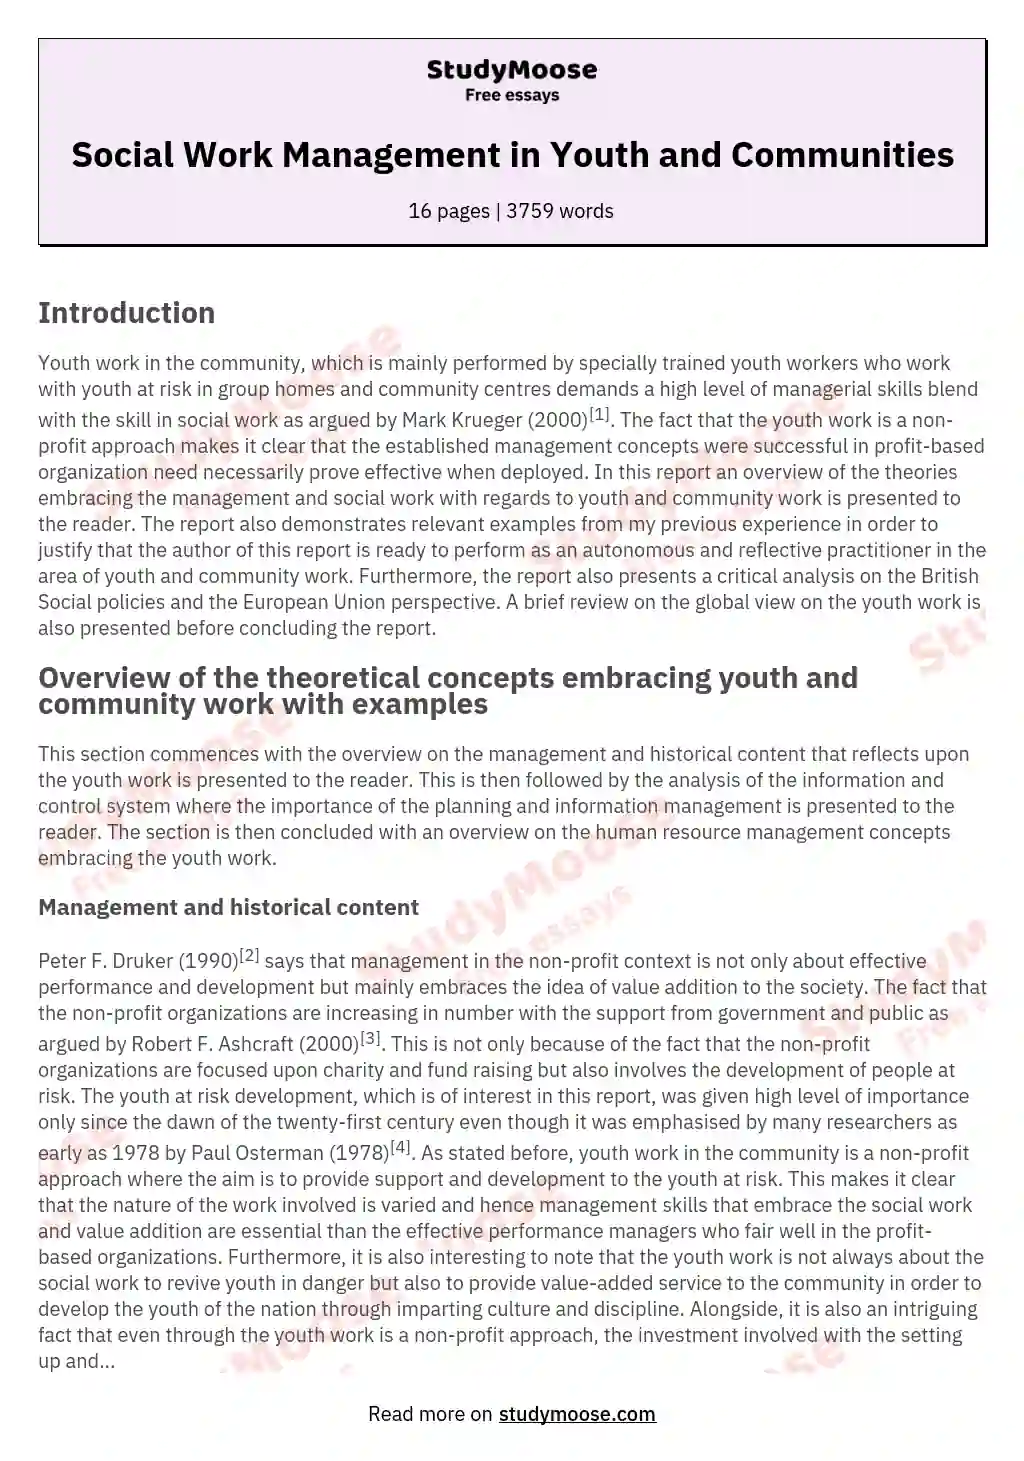 Social Work Management in Youth and Communities